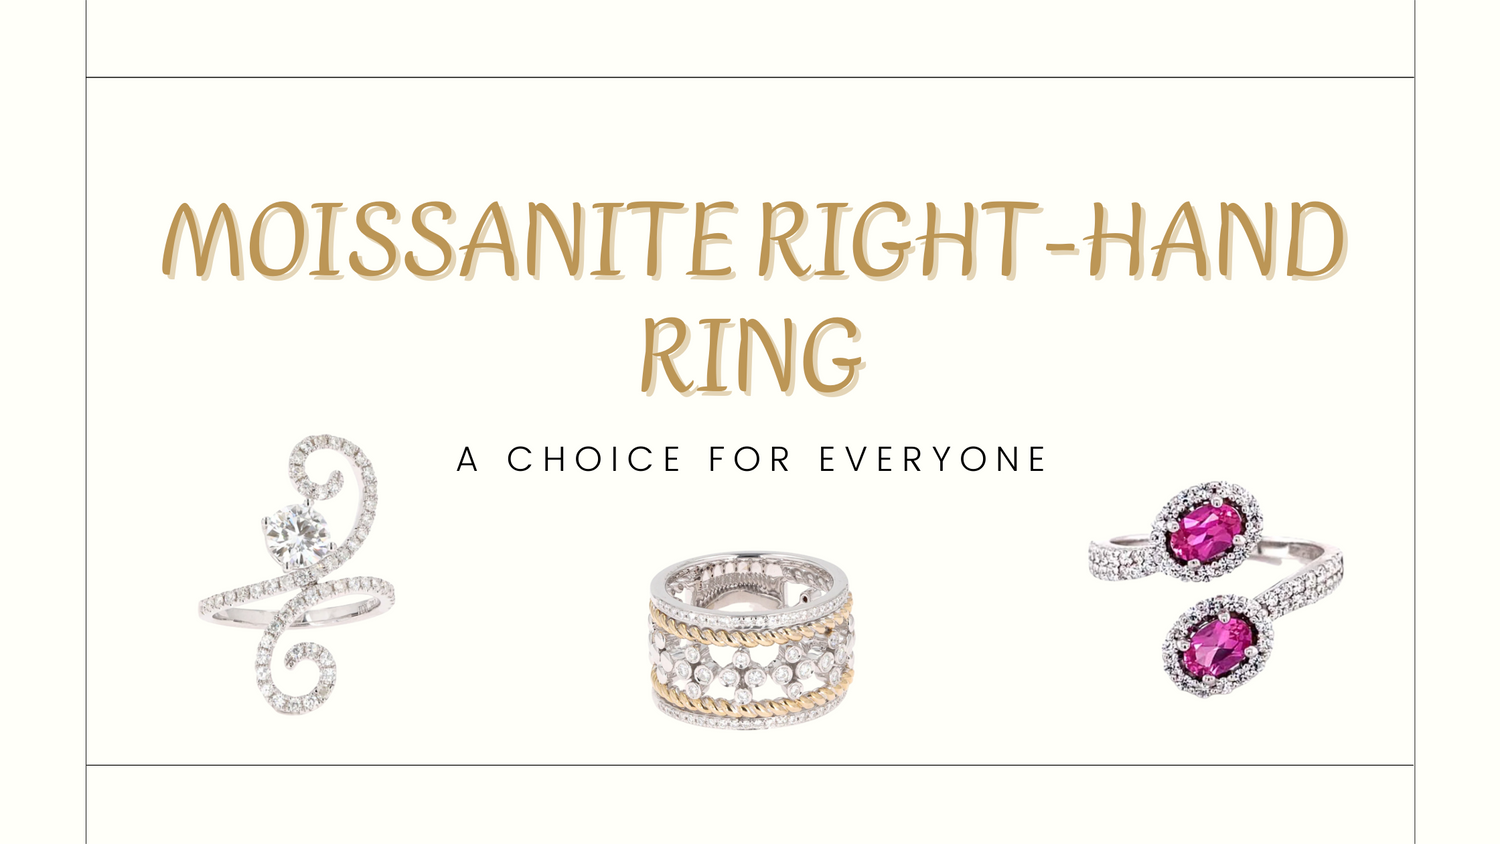 Moissanite Right-Hand Ring: A Choice for Everyone